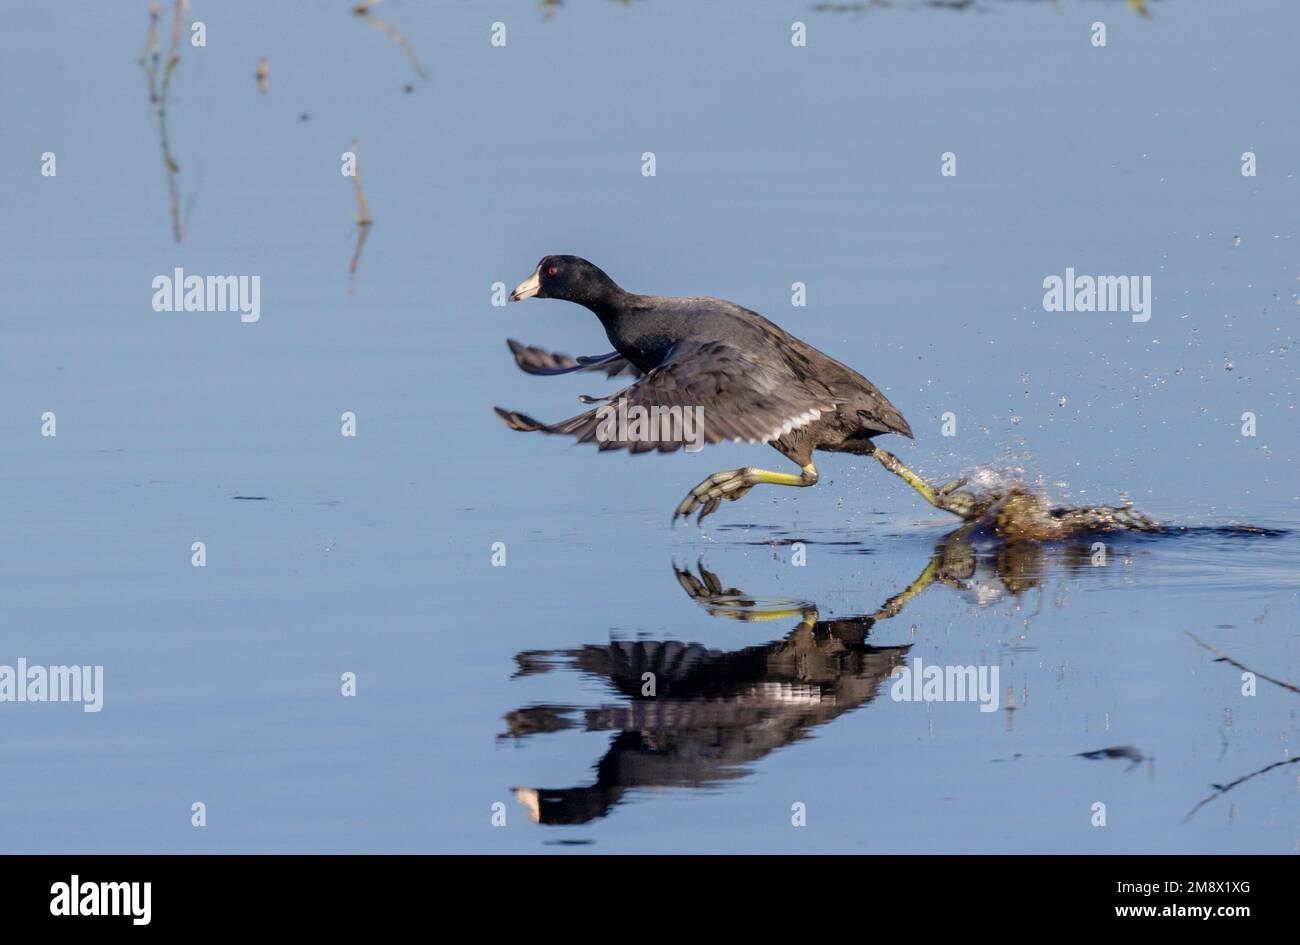 American coot (Fulica americana) taking flight from water, Brazos Bend State Park, Texas, USA. Stock Photo